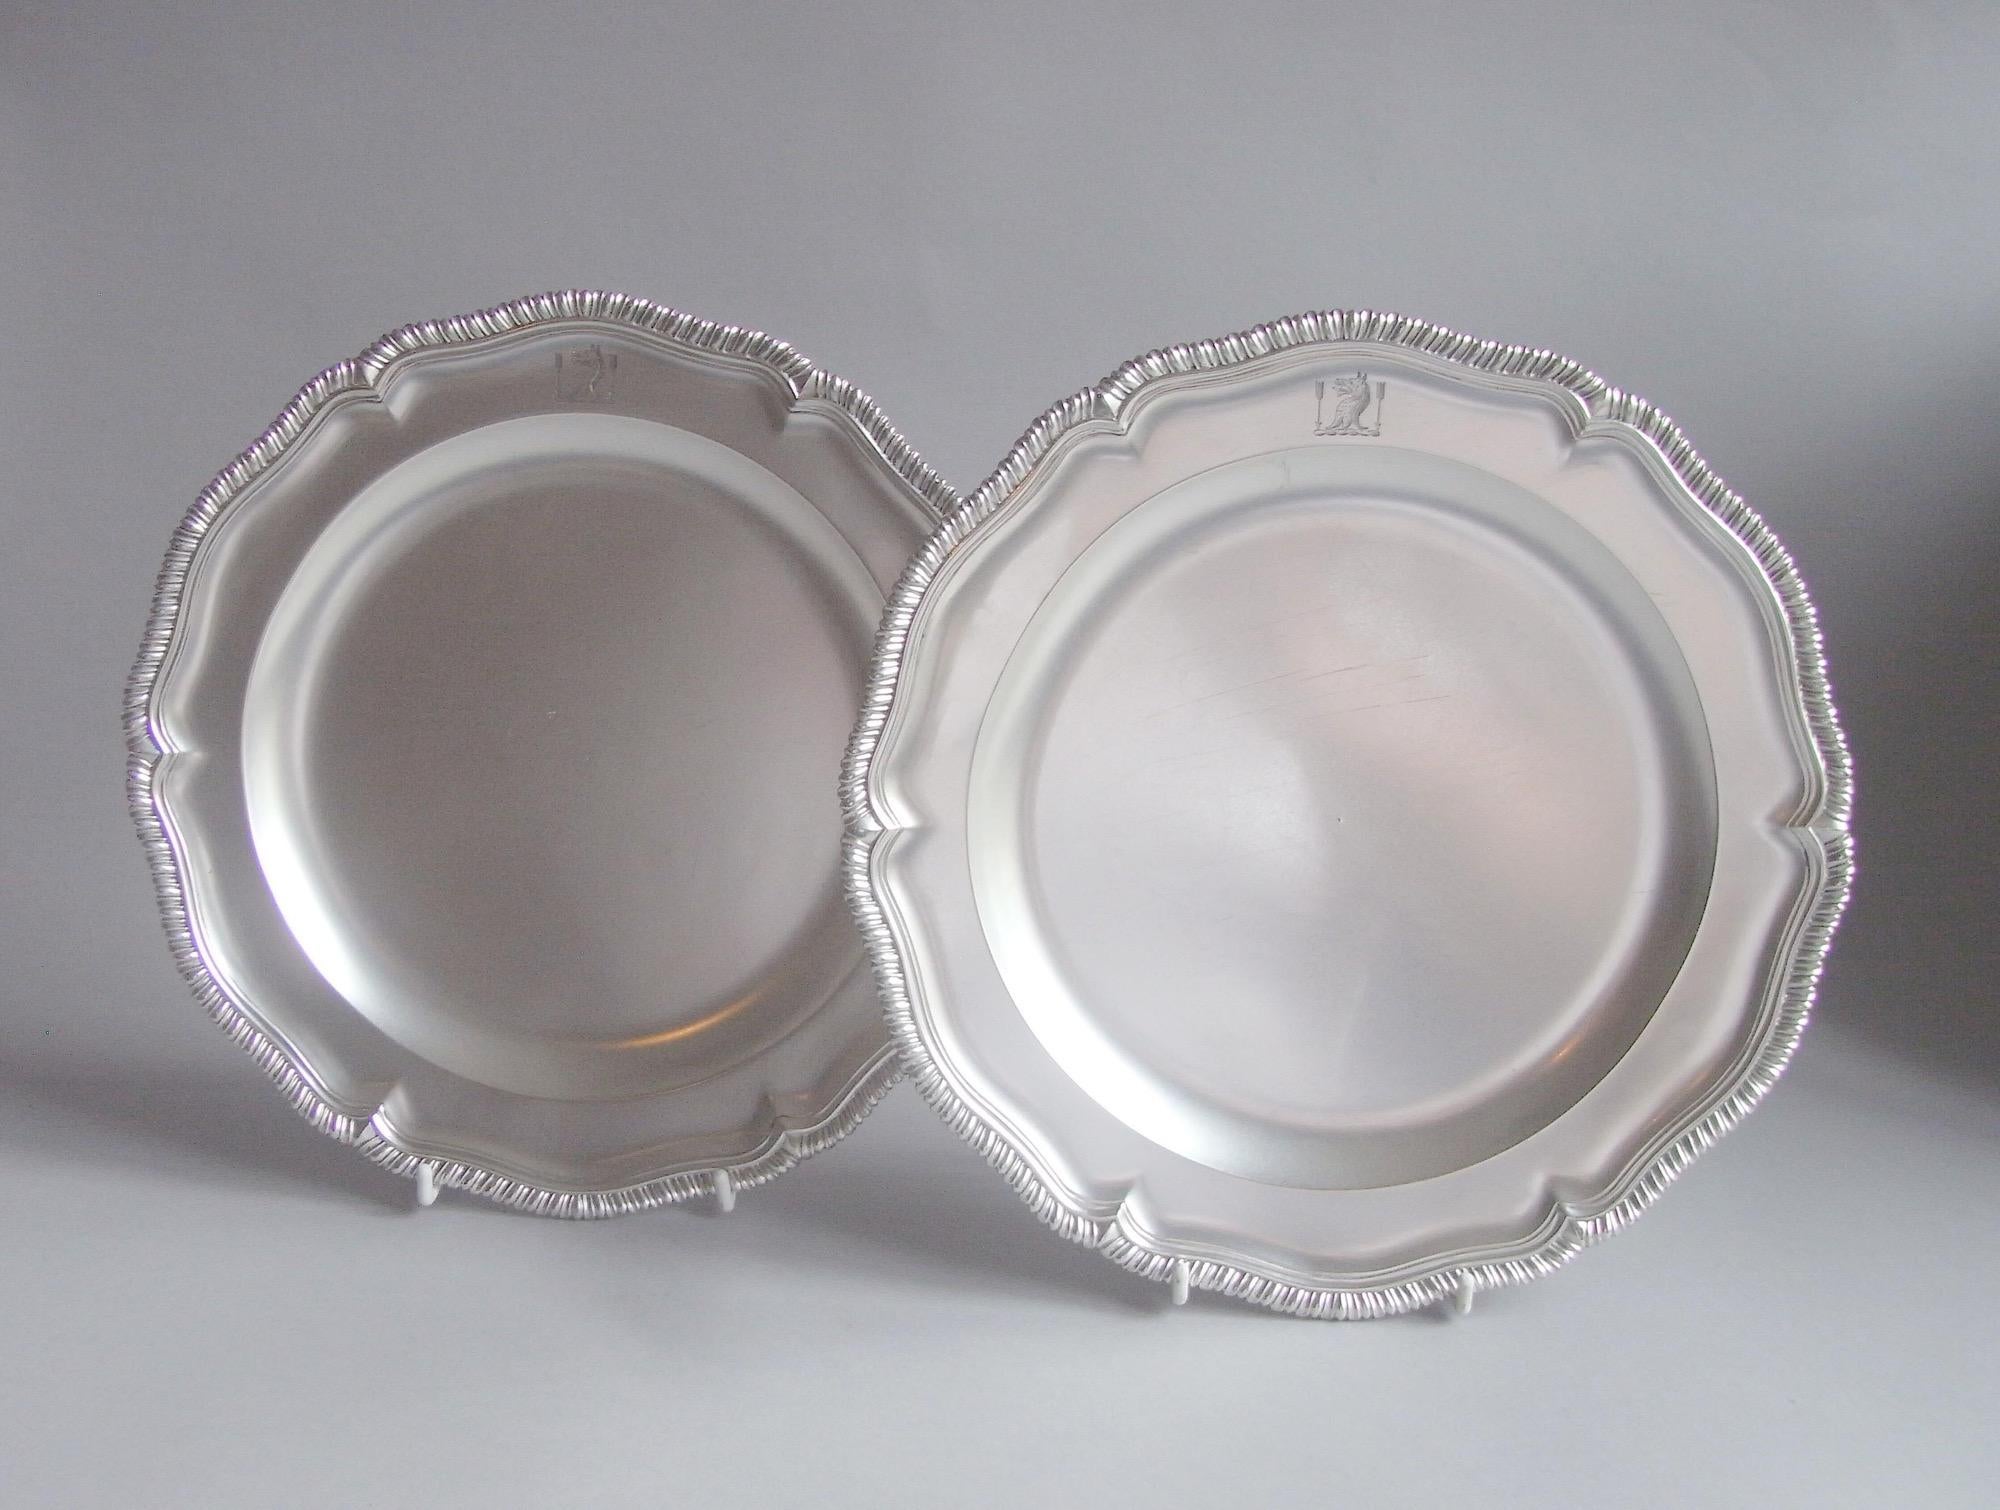 Pair of George II Second Course Serving Dishes. London 1754 by John Jacobs. For Sale 4